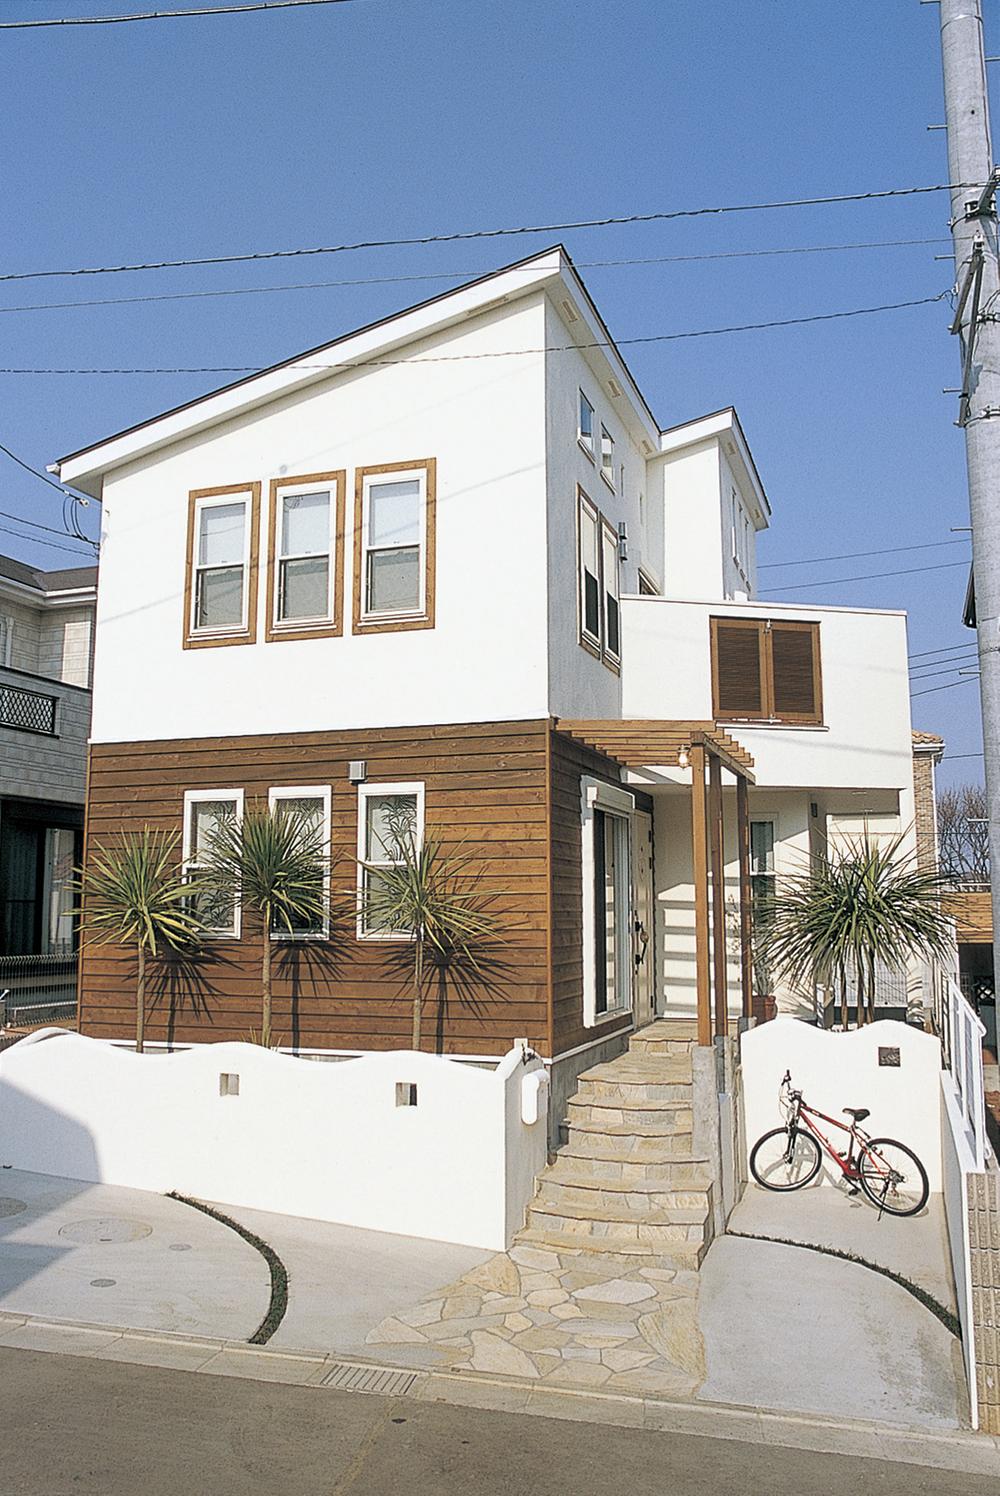 Other building plan example. Appearance of simple style to match the blue sky of Shonan